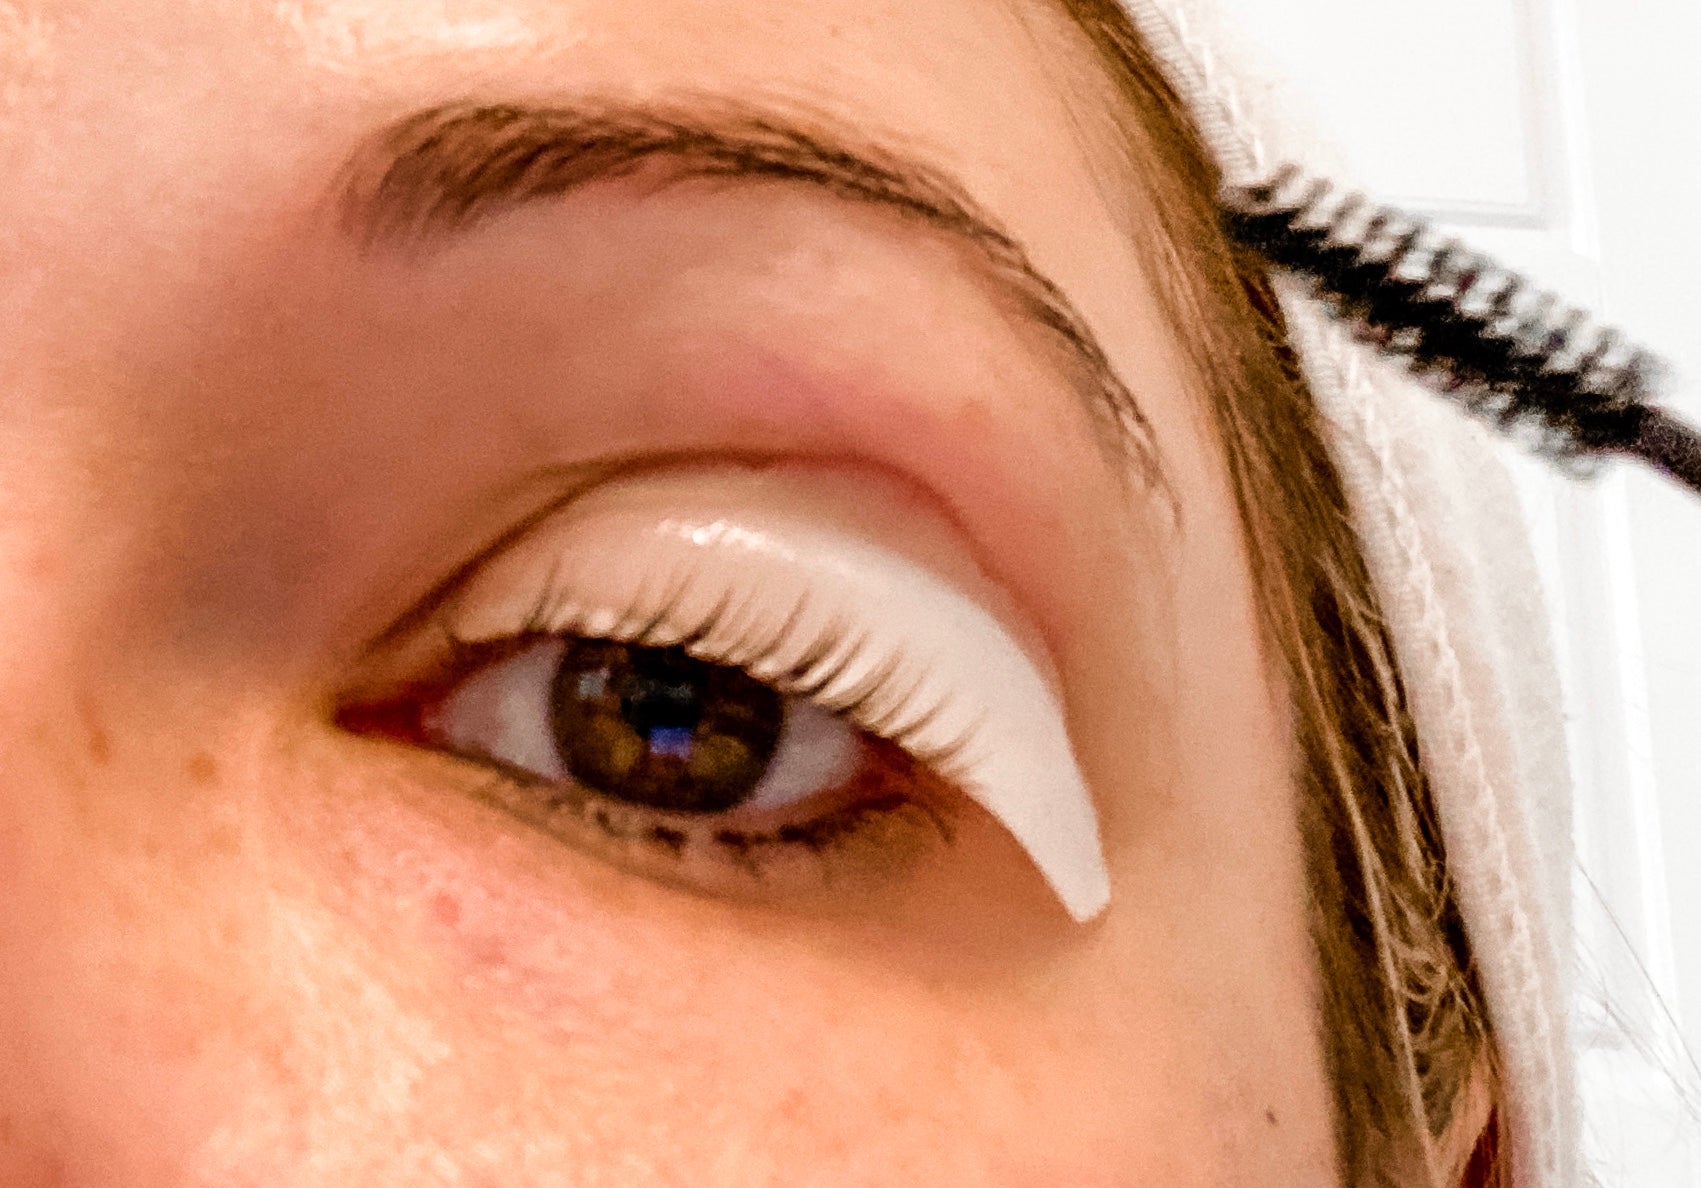 Step-by-Step Guide on How to Do Lash Lift and Tint at Home